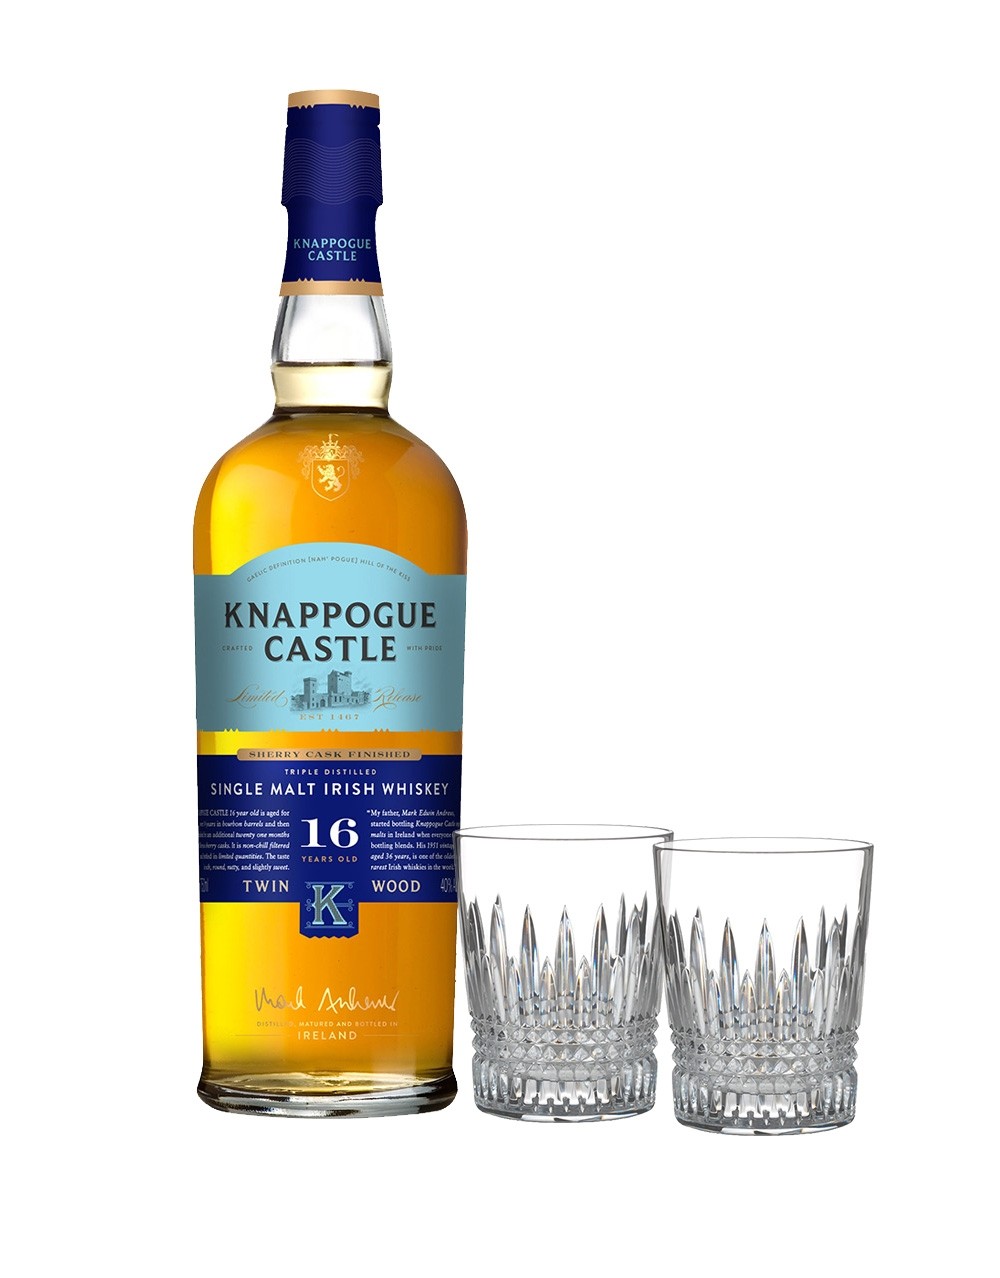 Knappogue Castle Single Malt 16 Year Old with Waterford